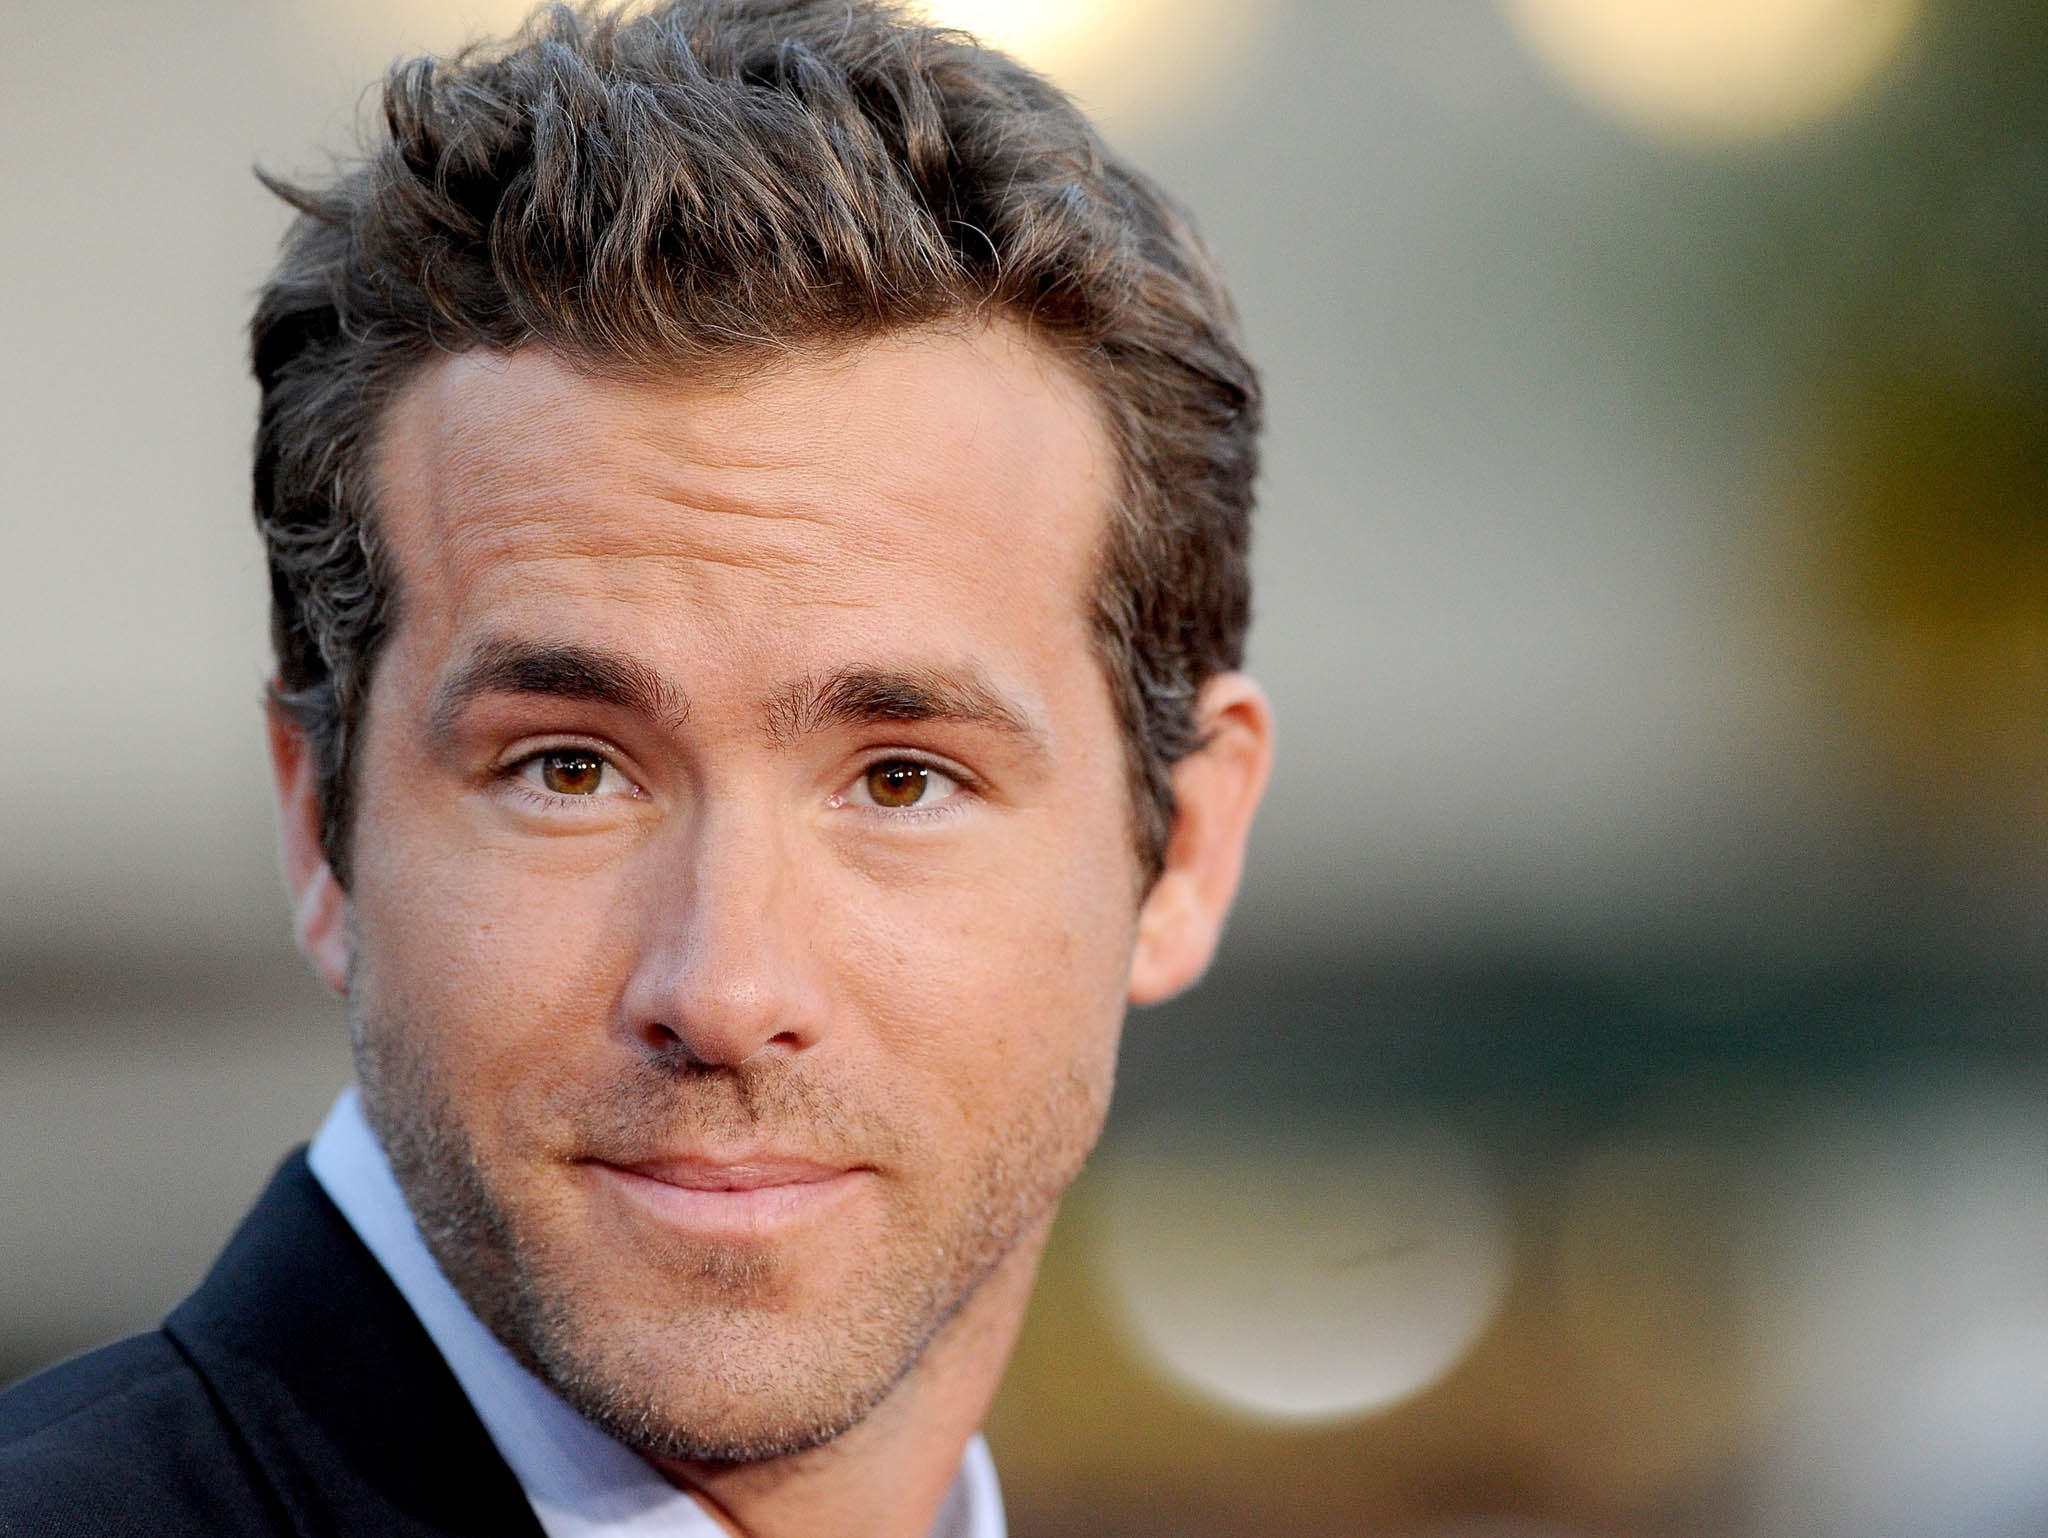 Actor Ryan Reynolds returns $10.70 at the box office for every dollar he receives. He looks set to rise up the over-paid list after his movie 'R.I.P.D' became one of 2013's biggest flops after Forbes' research deadline.